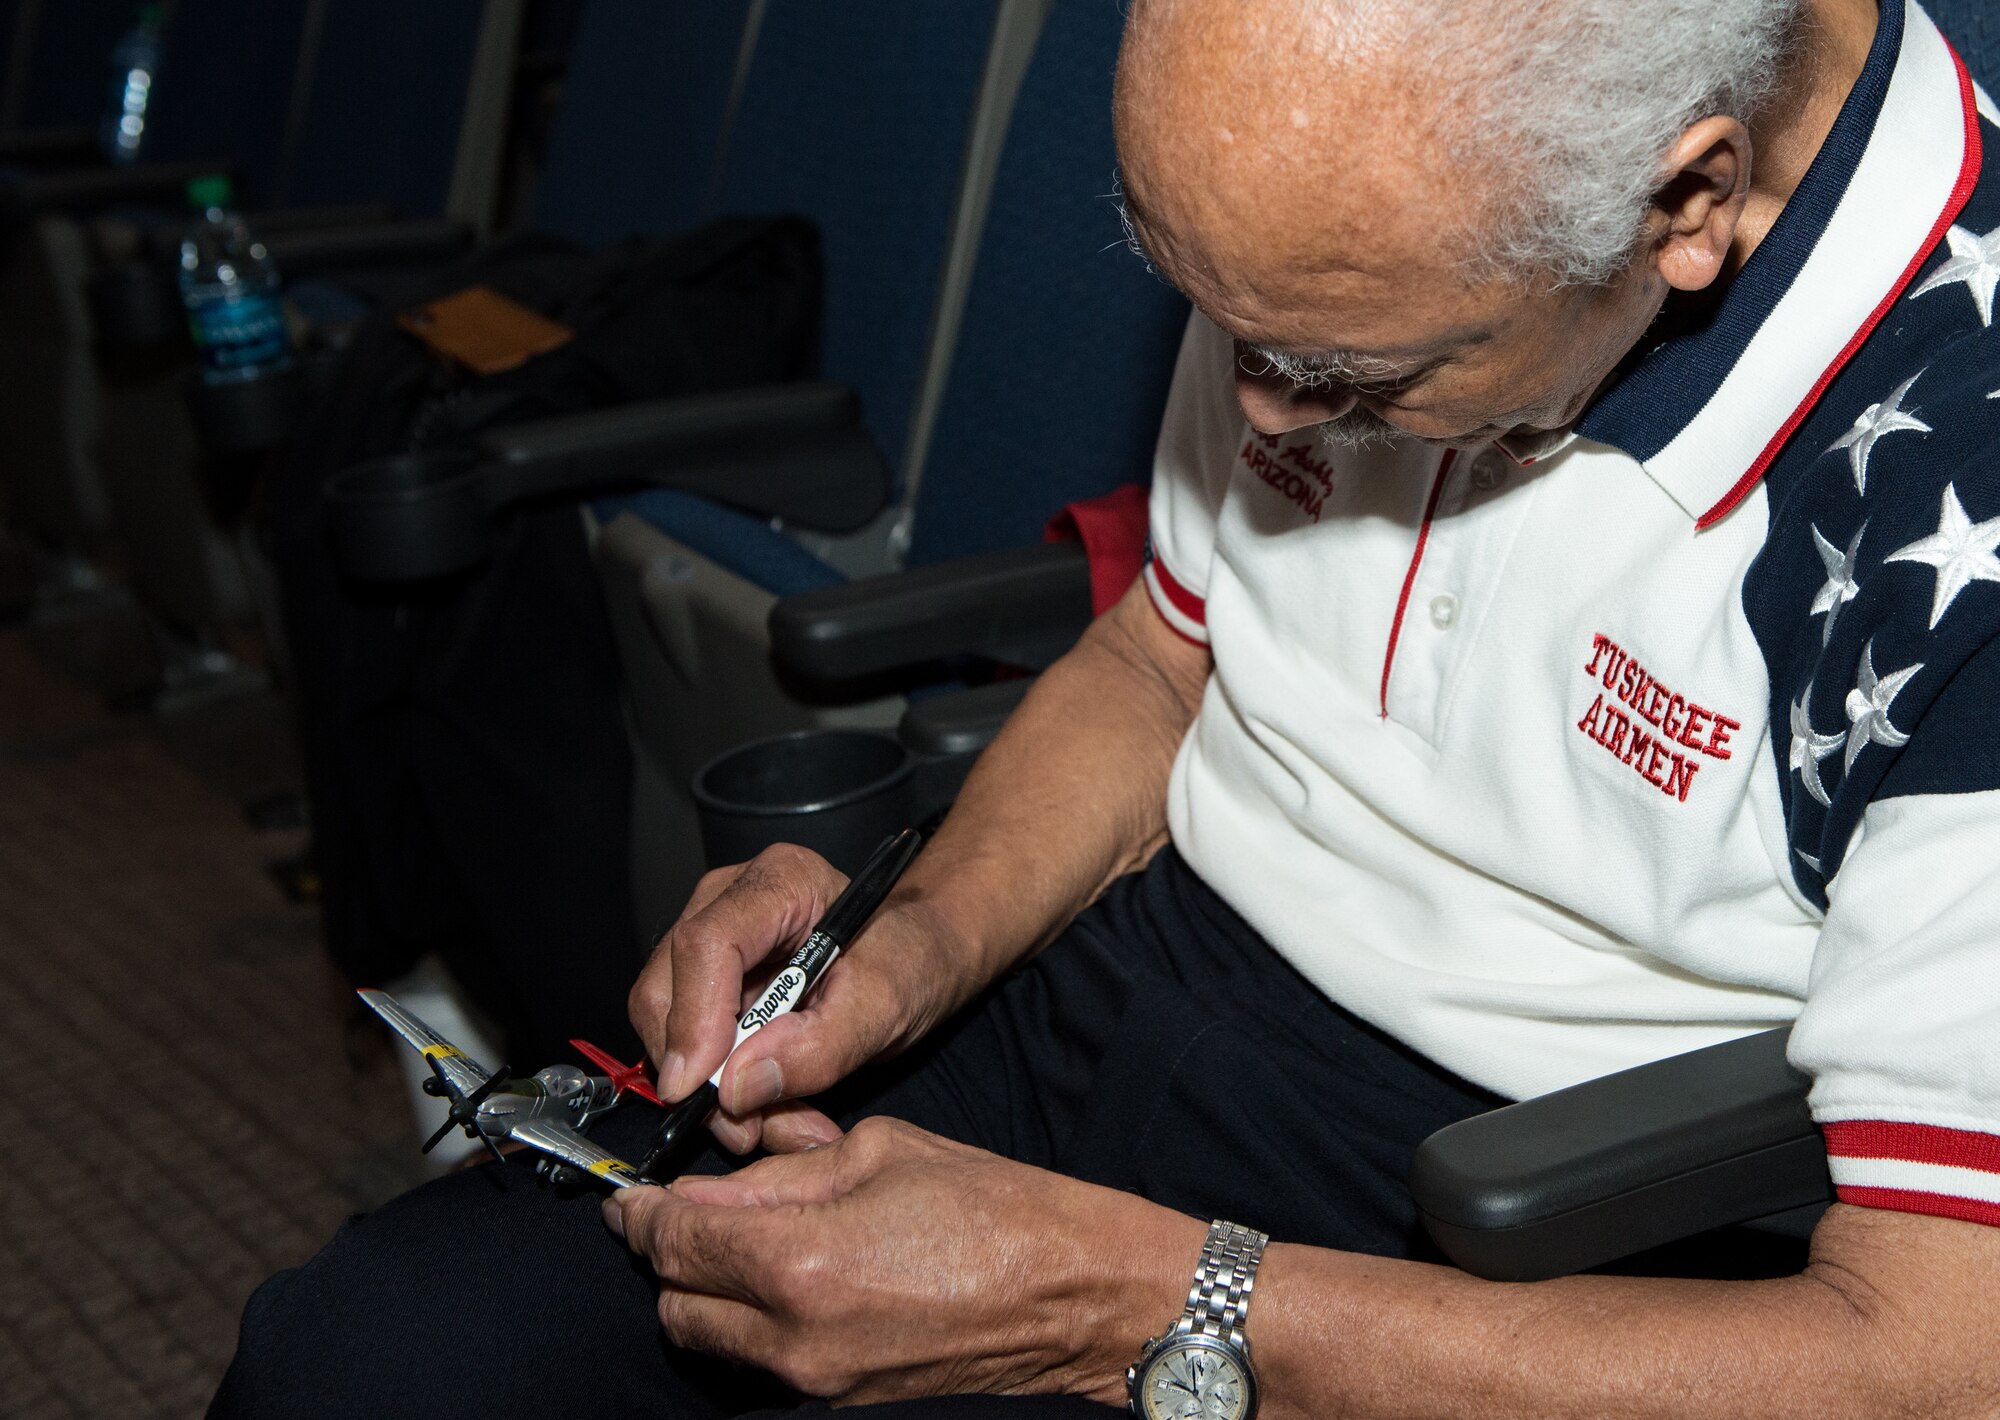 Retired Lt. Col. Robert Ashby, Tuskegee Airman, autographs a toy model P-47 Thunderbolt during the 2018 Tuskegee Airmen Honor Event at Luke Air Force Base, Ariz., Feb. 15, 2018. The Tuskegee Airmen were the first black military aviators in the U.S. Army Air Corps who performed more than 15,000 combat sorties, including 200 escort missions, earning them more than 850 service medals. (U.S. Air Force photo/ Airman 1st Class Alexander Cook)